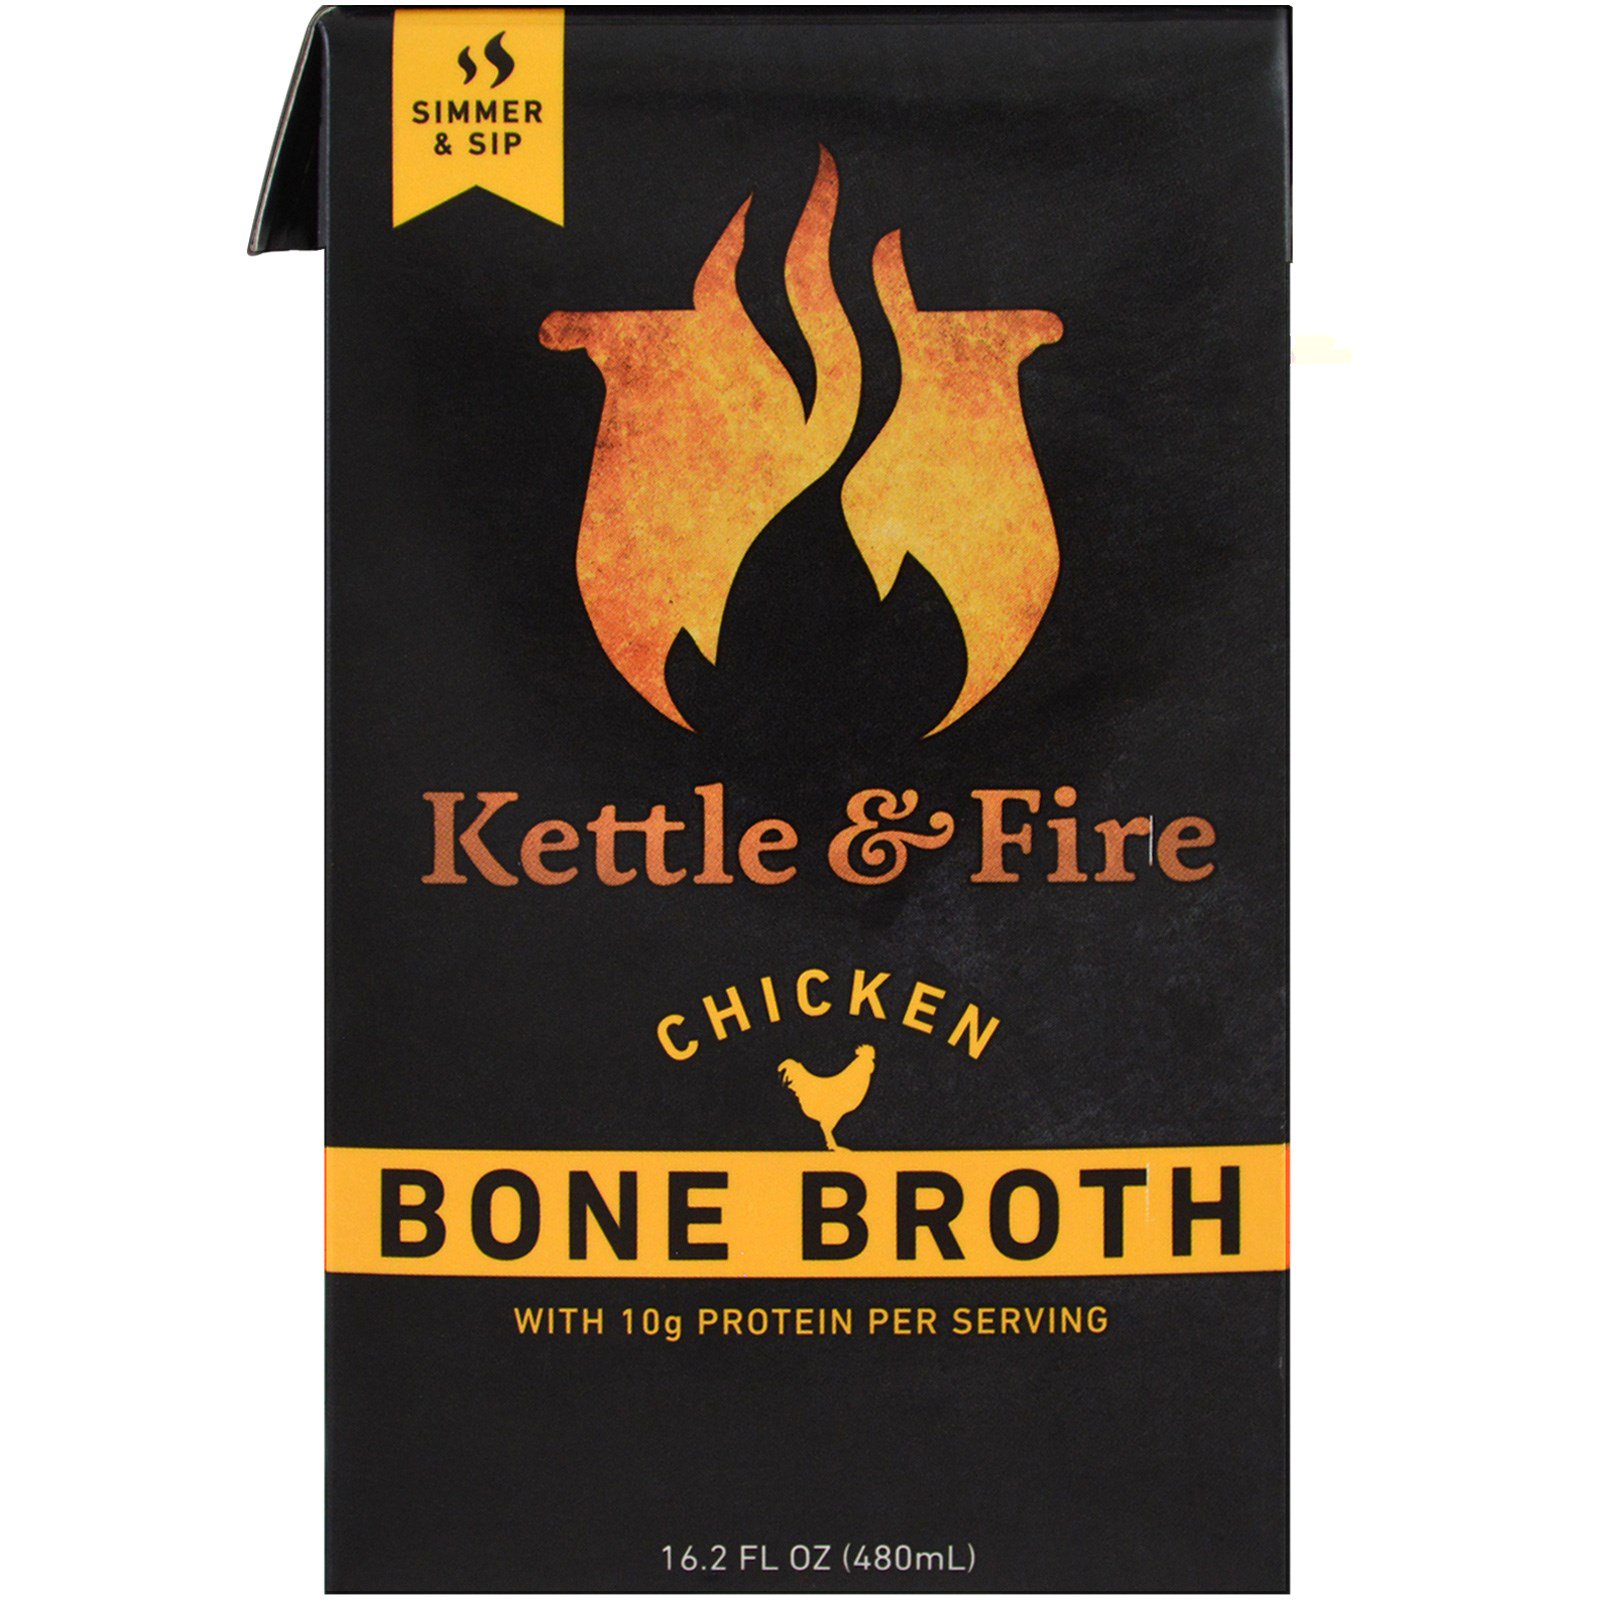 Bone broth - what's the hype?